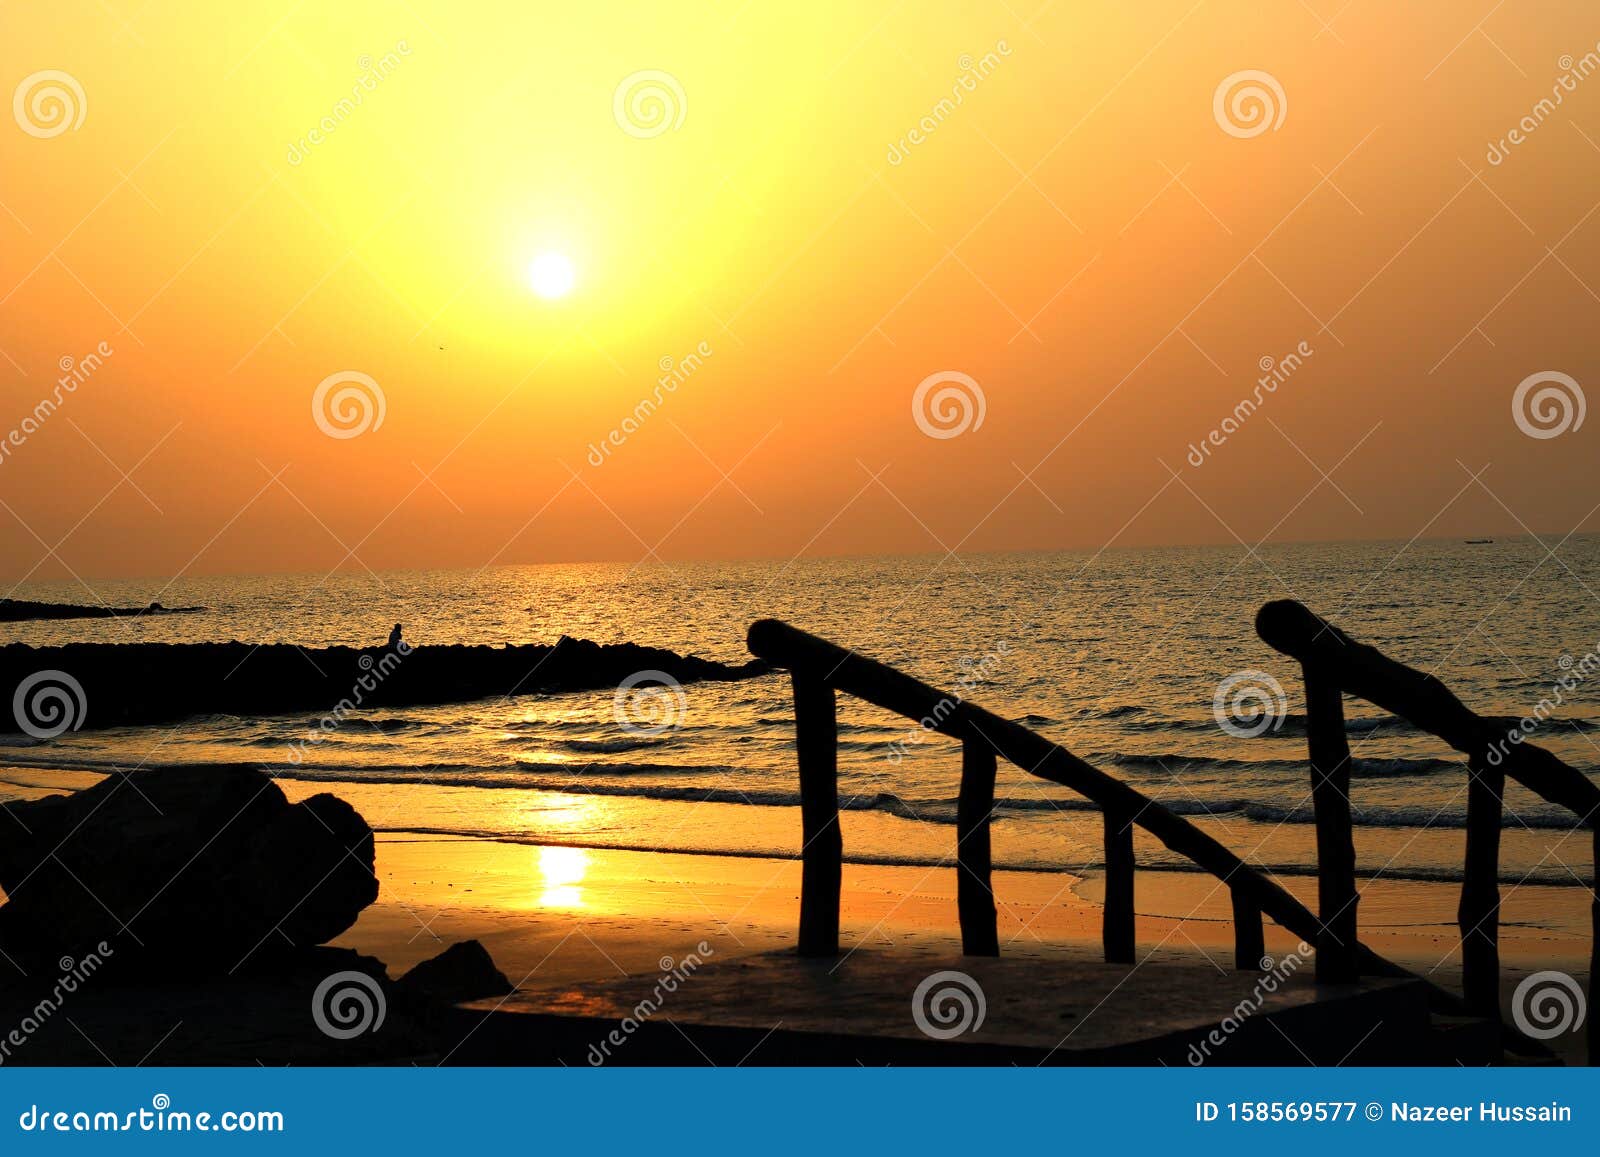 Sunset Ocean Wallpaper Backgrounds View Stock Image - Image of sunrise,  night: 158569577